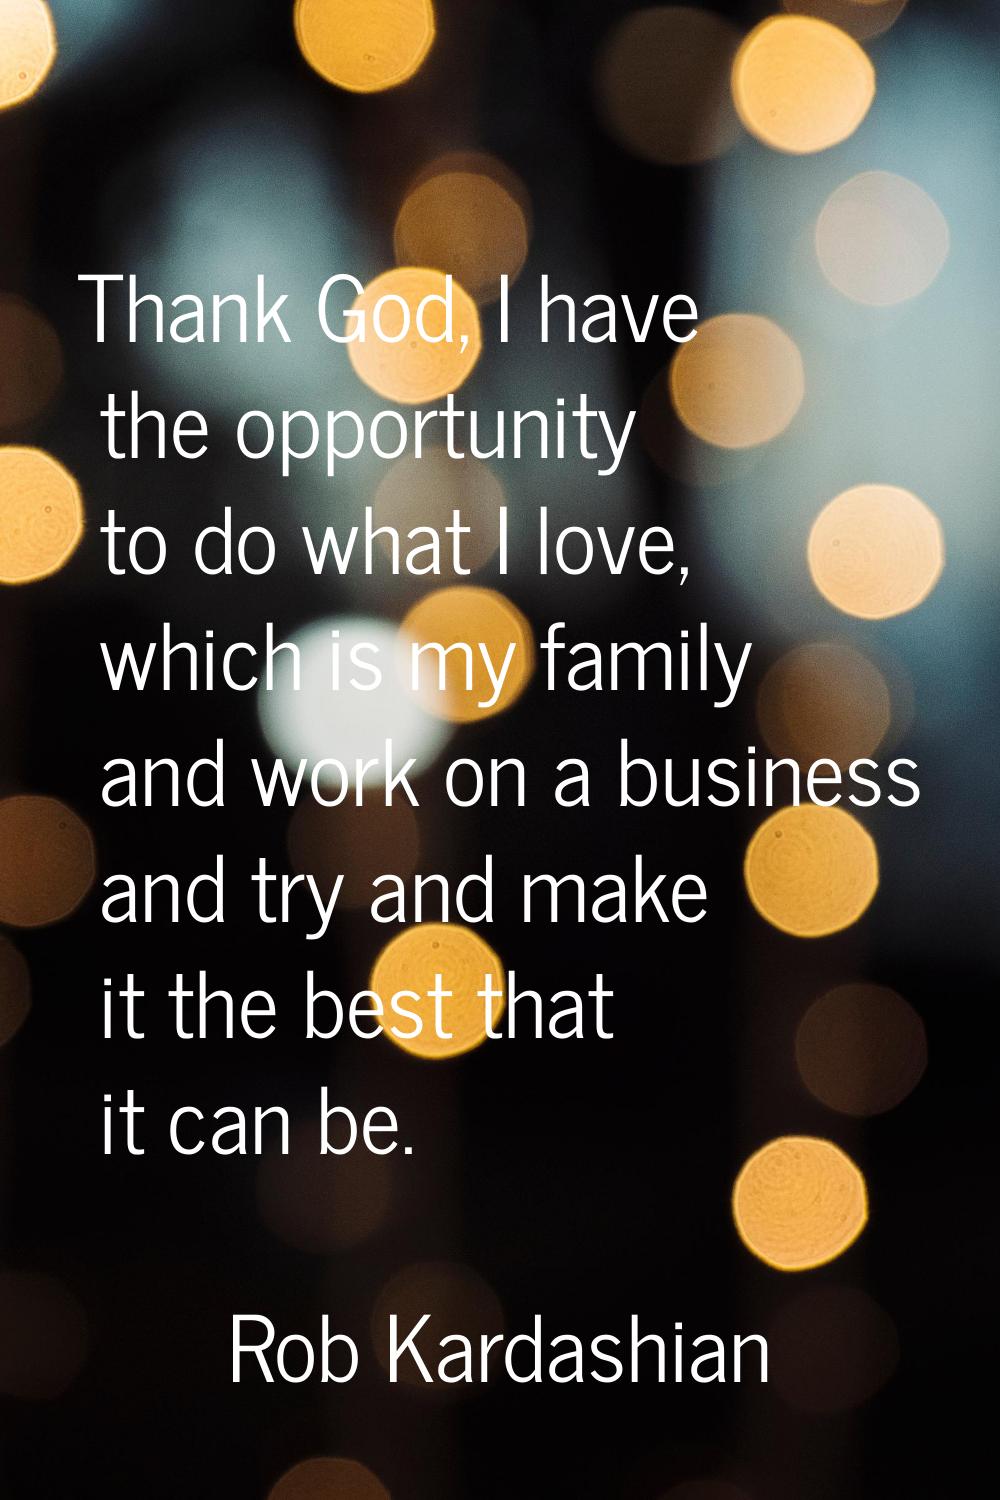 Thank God, I have the opportunity to do what I love, which is my family and work on a business and 